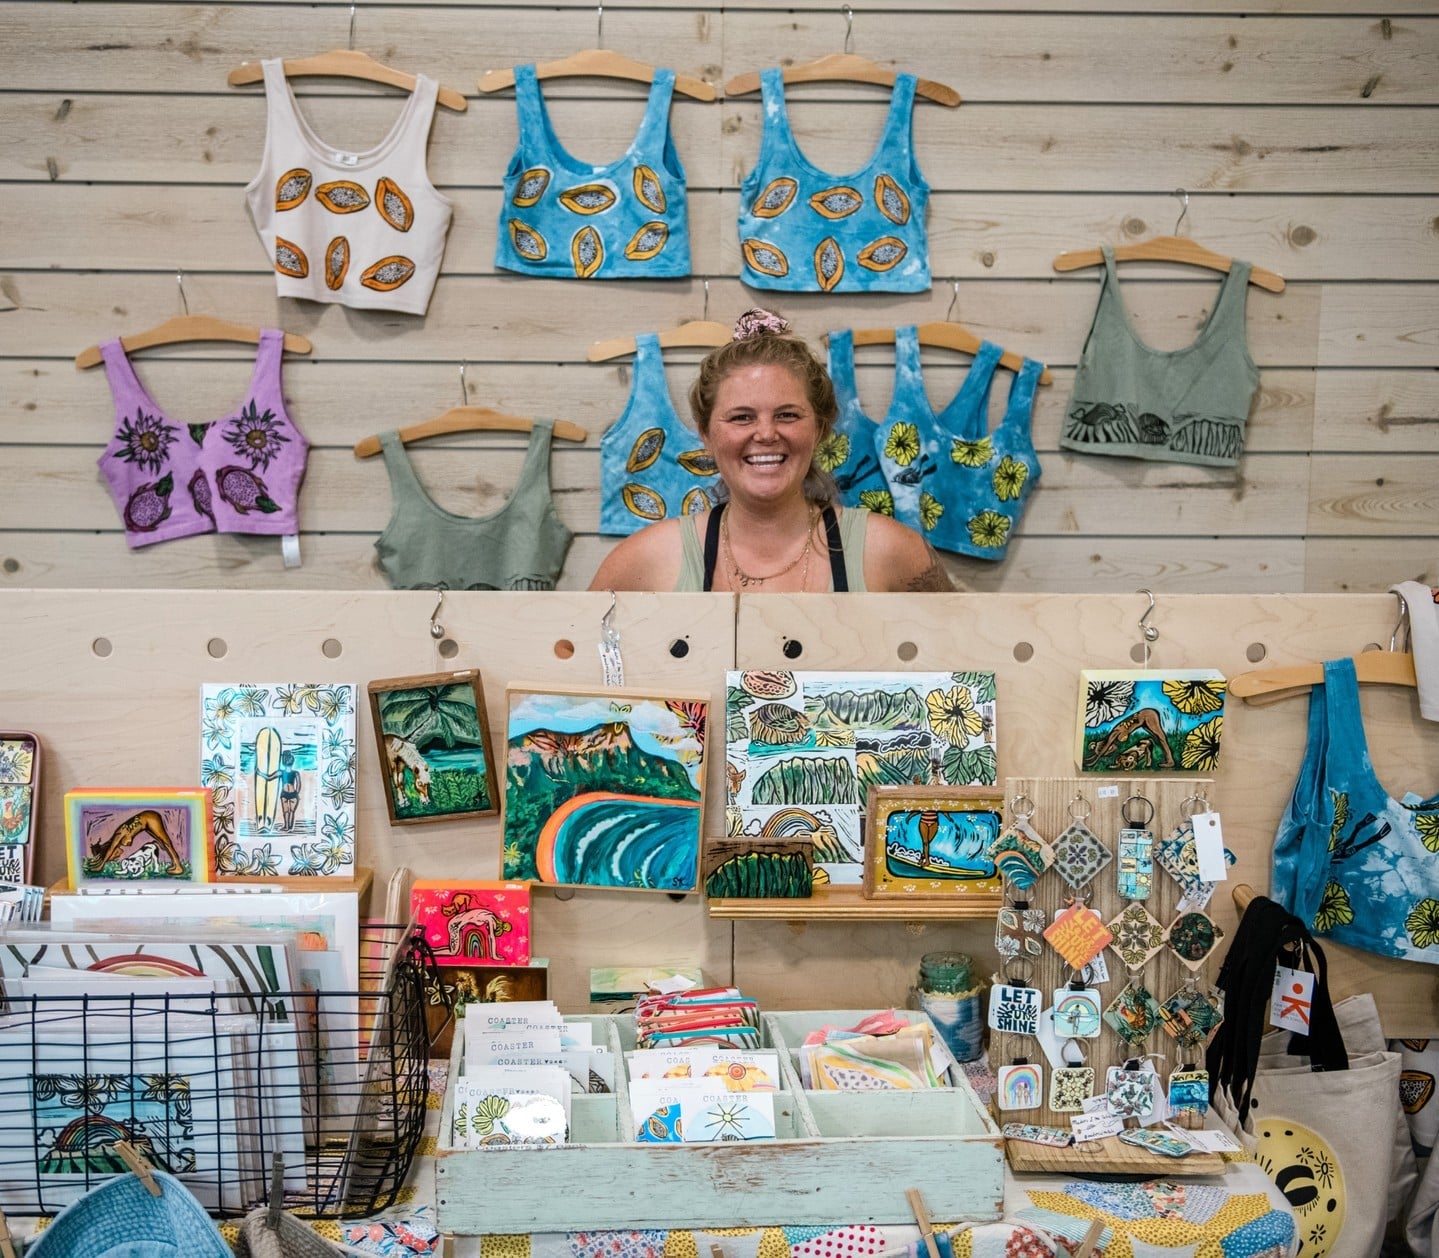 Explore one-of-a-kind finds @artandflea and discover a diverse mix of vendors showcasing some of Hawai‘i’s talented artisans. This pet-friendly event will be held from 10am - 3pm, Saturday & Sunday, November 26 & 27 and December 10 & 11 at the East Village Shops next to Nordstrom Rack. Click the link in our bio to learn more.